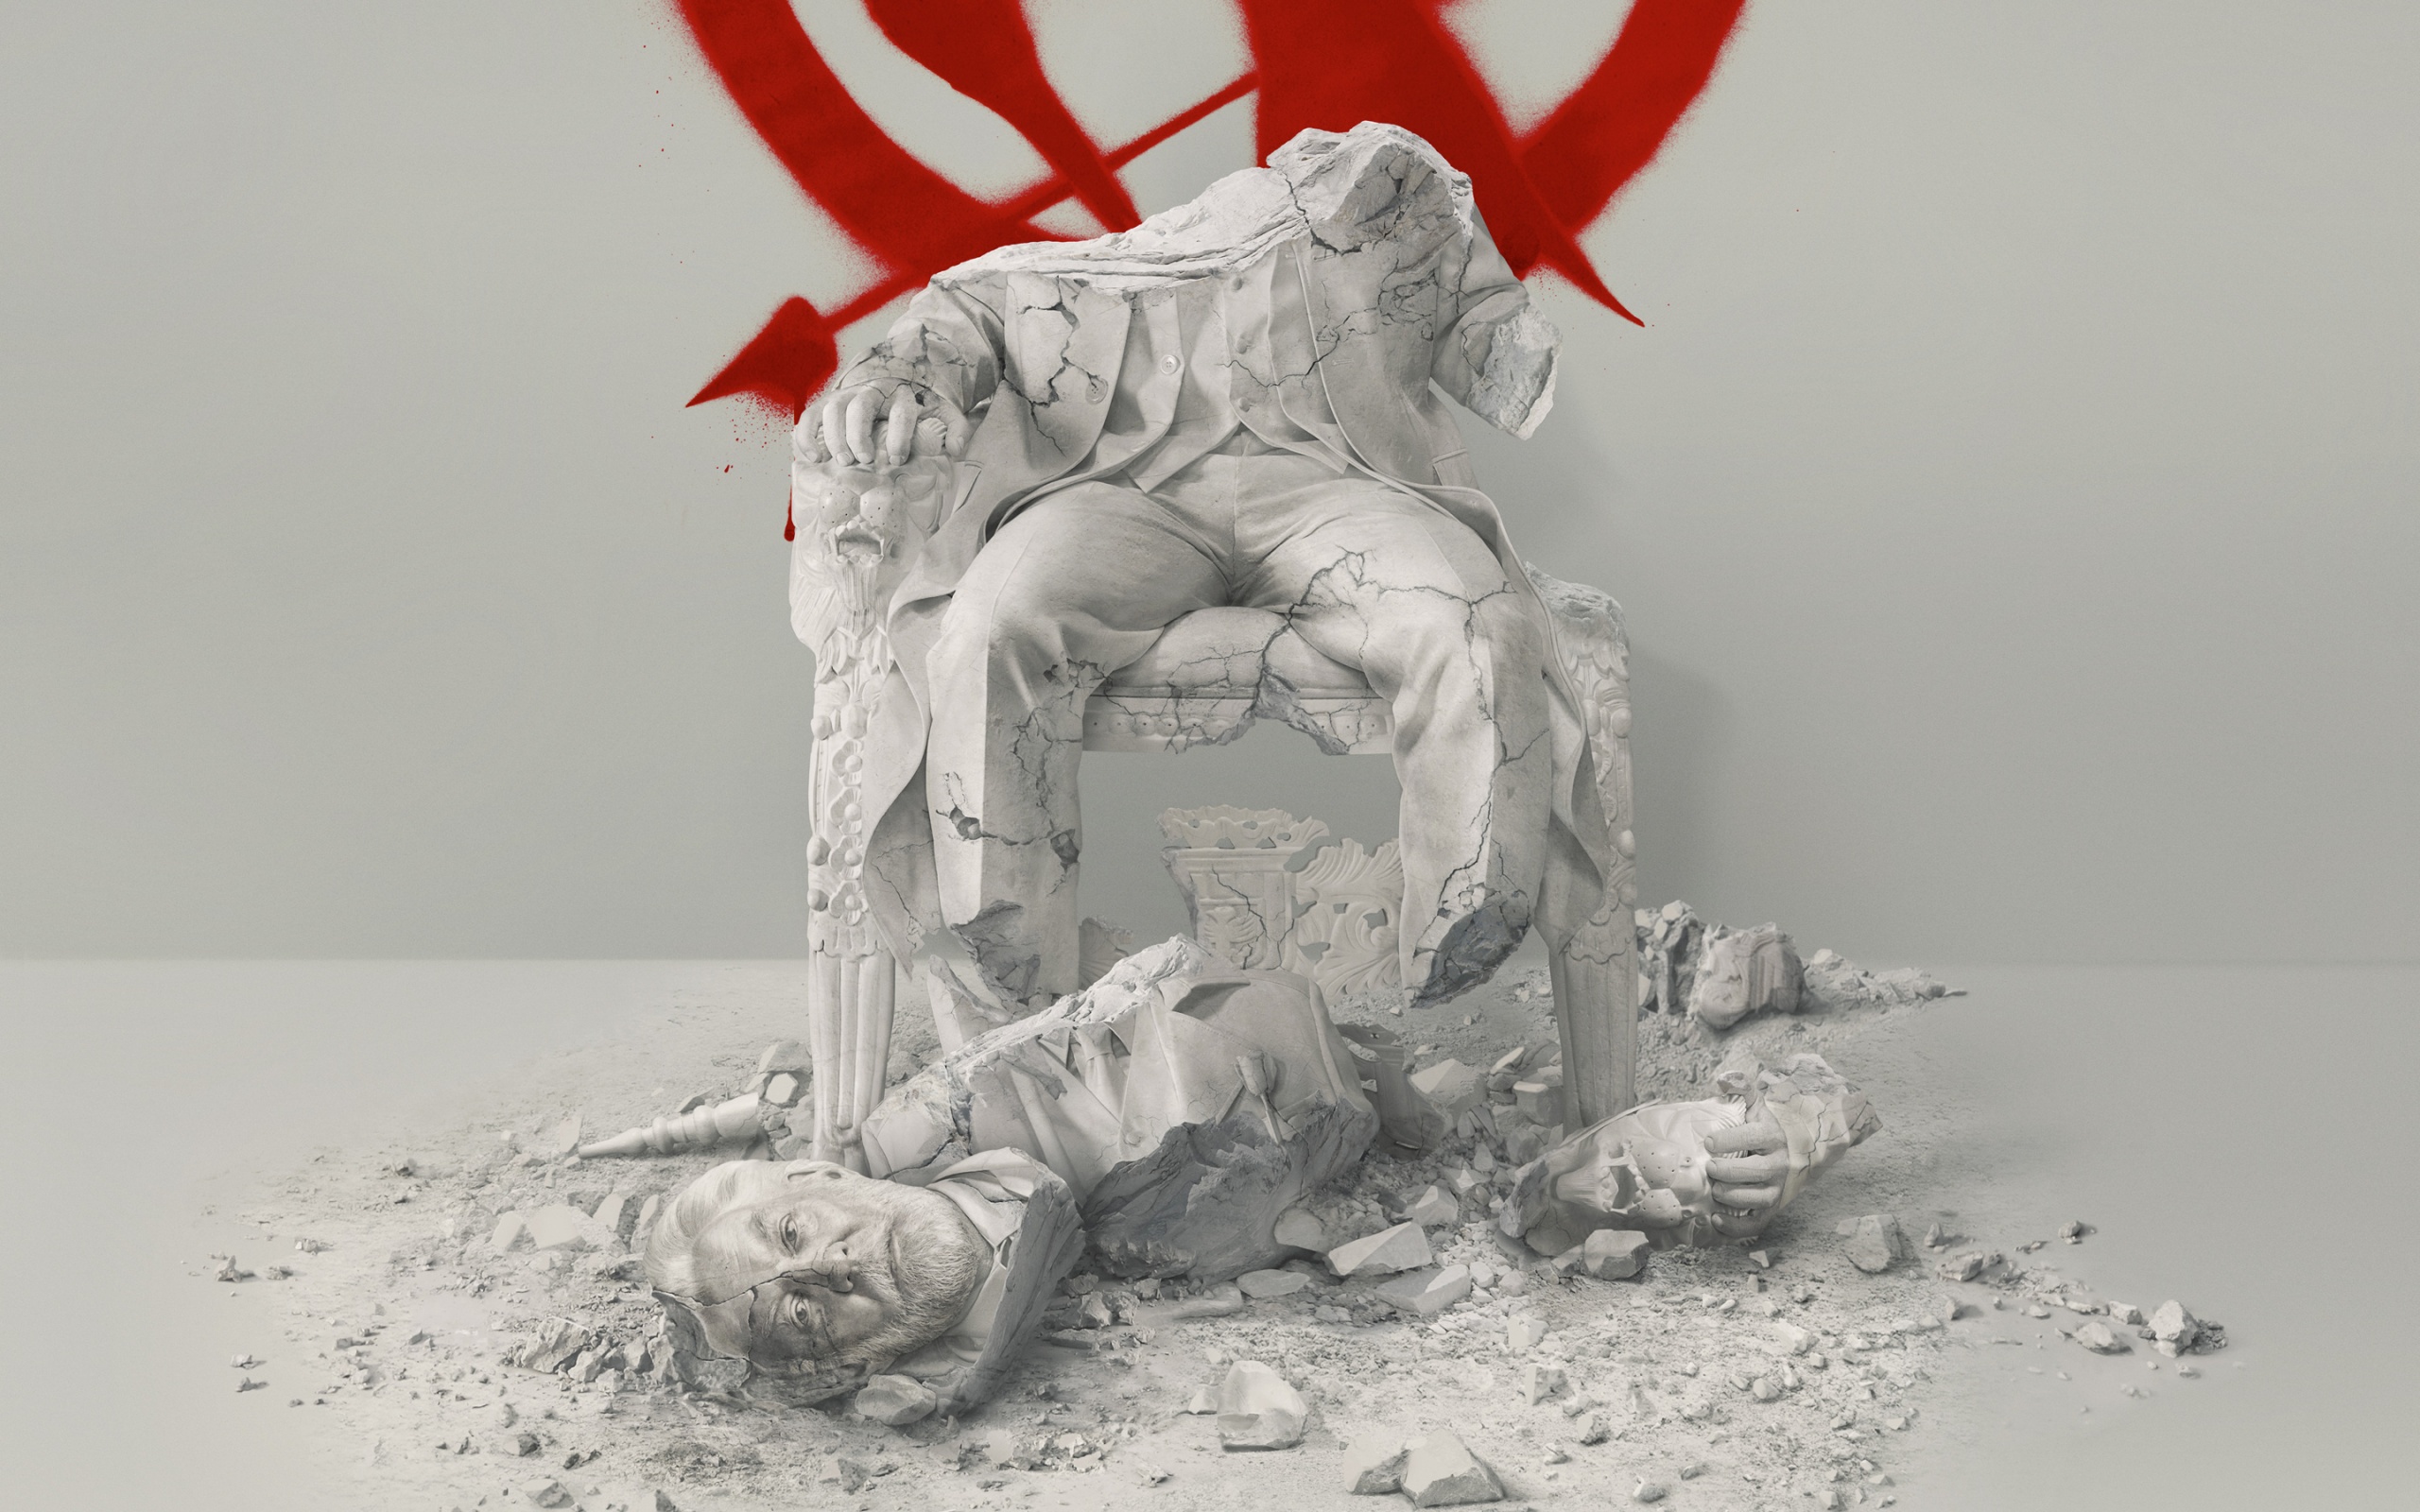 Hunger Games Mockingjay Part 2 2015 Wallpapers HD Wallpapers